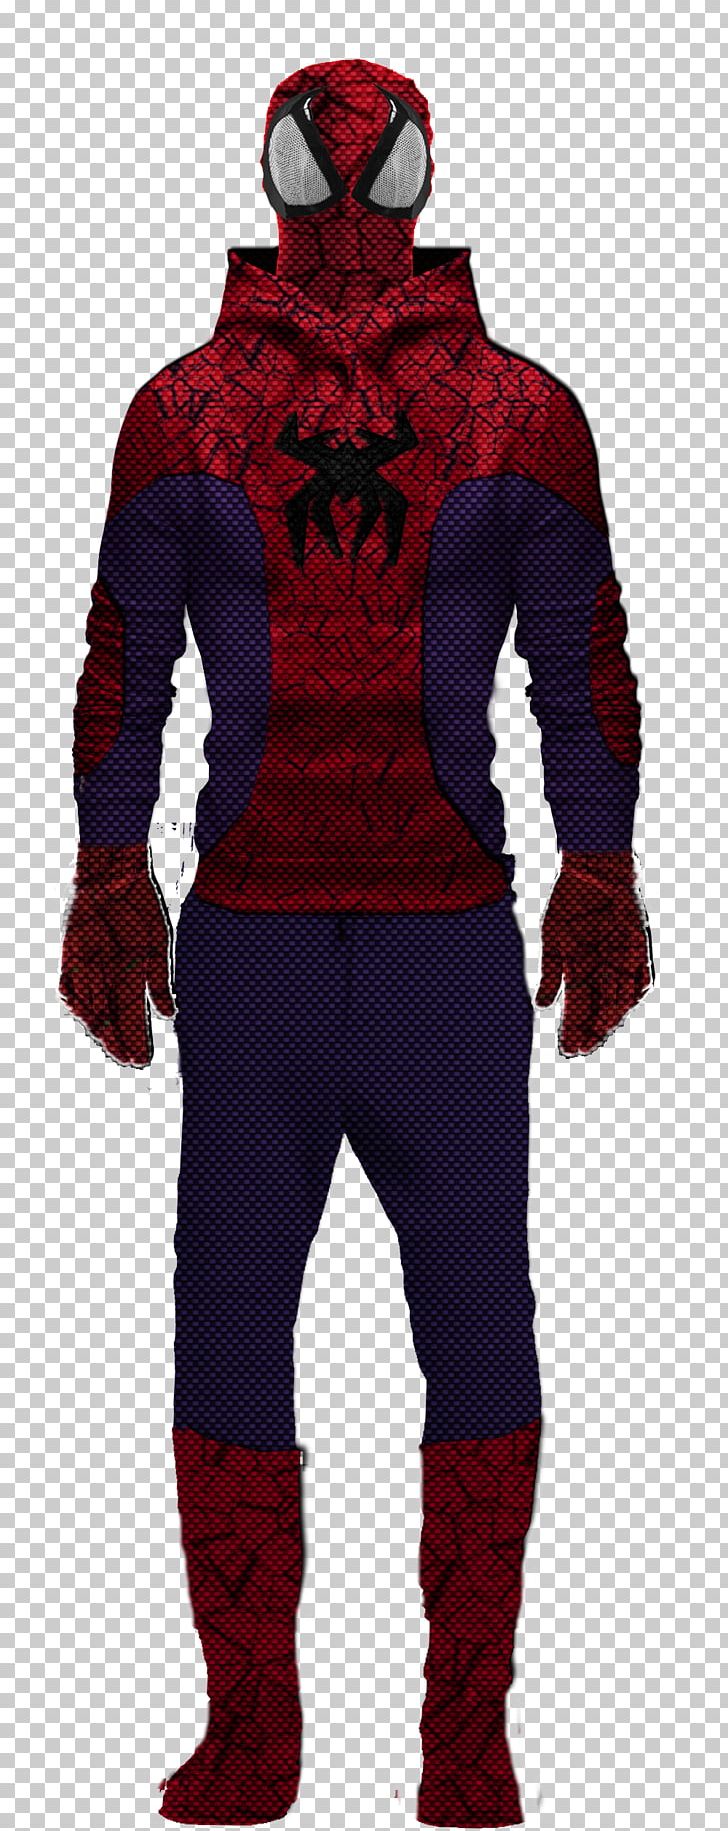 Superhero Costume PNG, Clipart, Costume, Fictional Character, Others, Outerwear, Superhero Free PNG Download